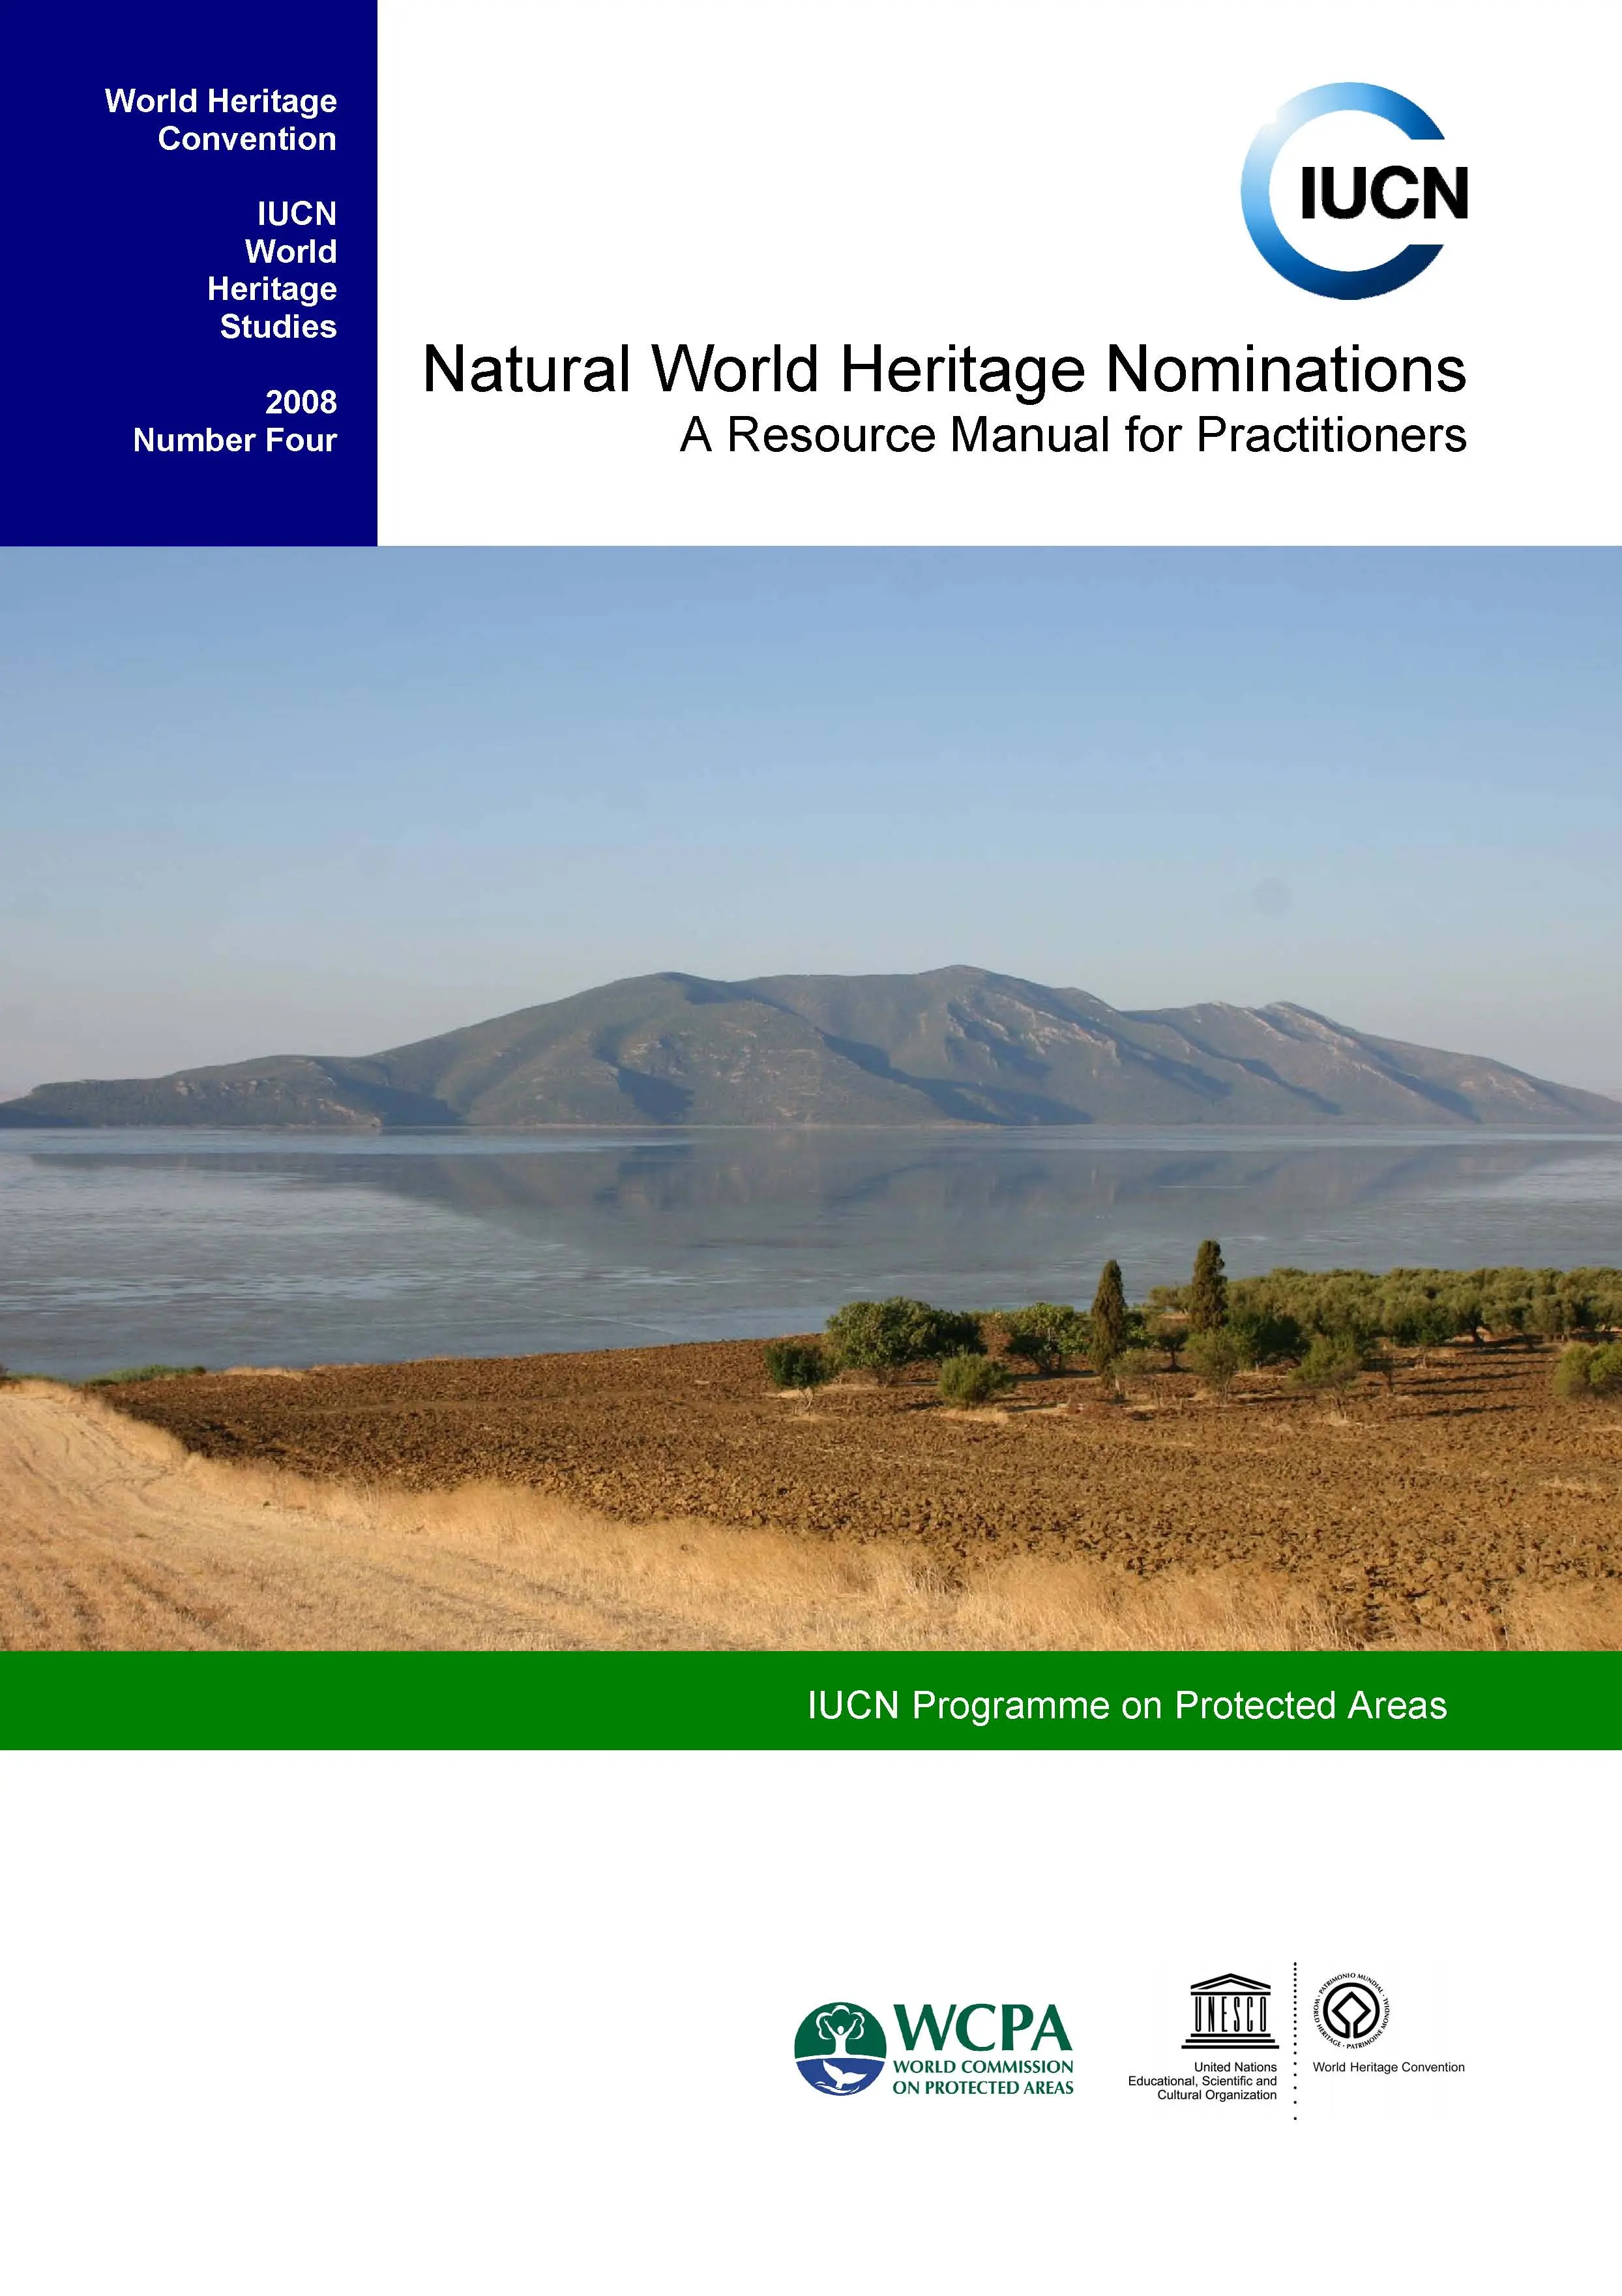 Natural World Heritage Nominations: A resource manual for Practitioners